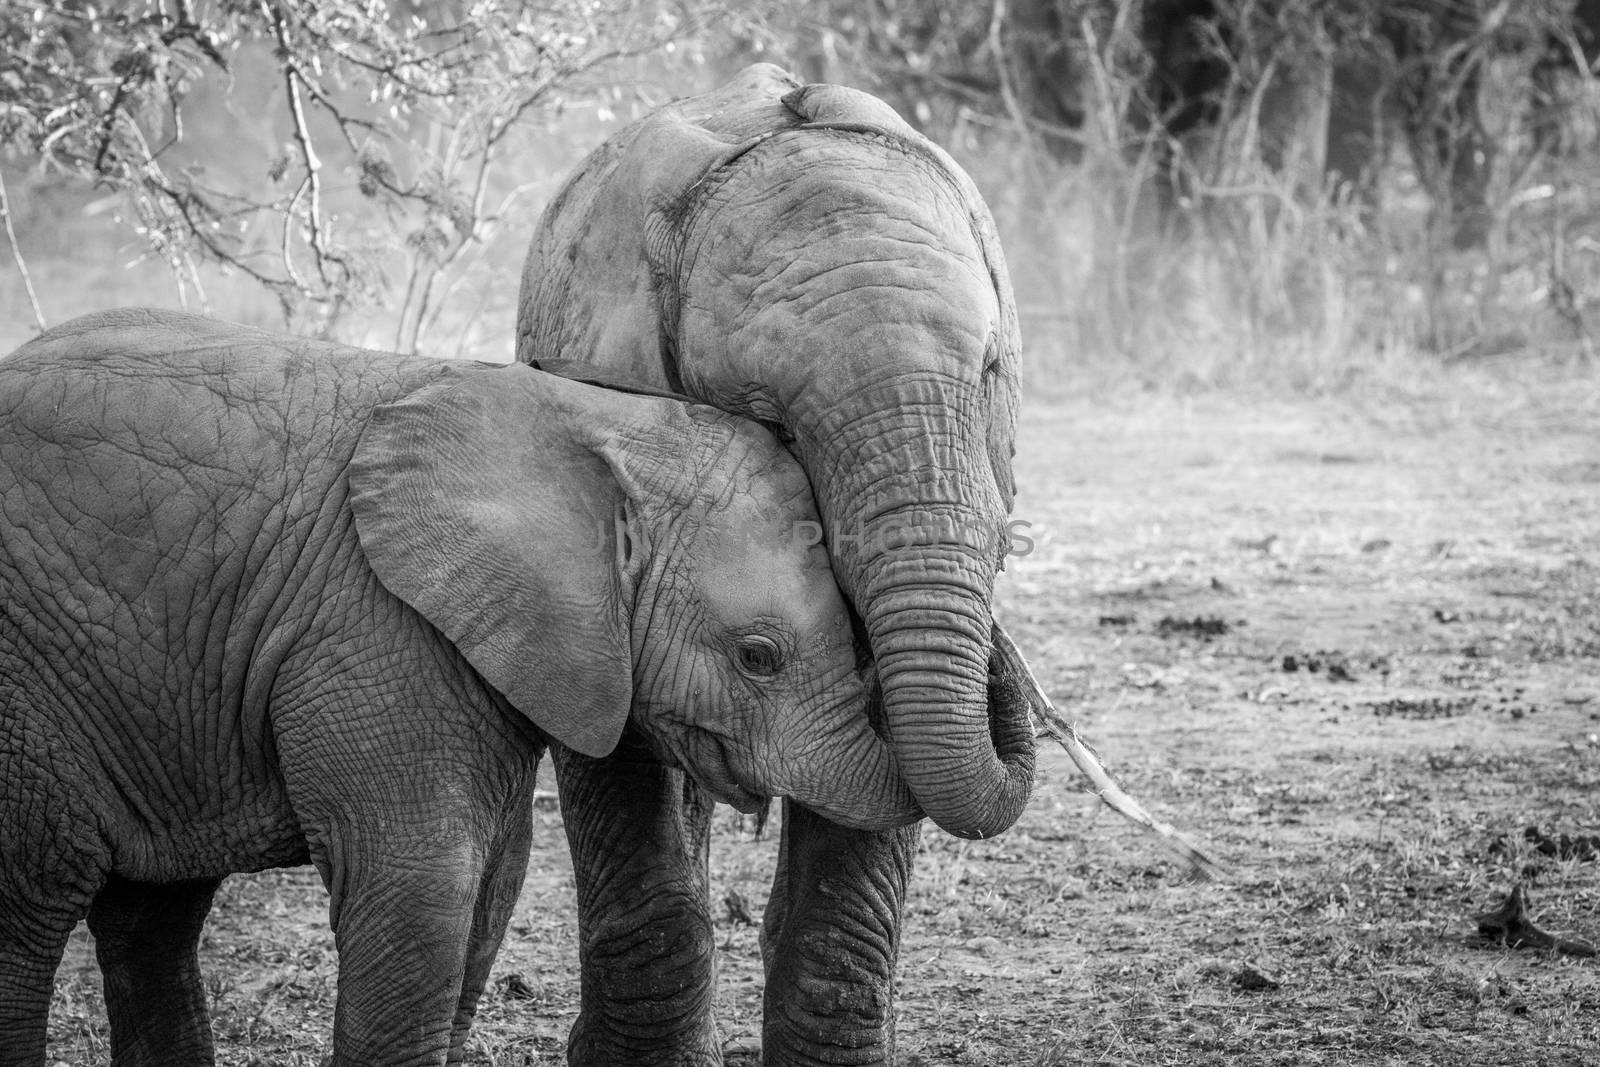 Two young Elephants cuddling in black and white in the Kruger National Park, South Africa.